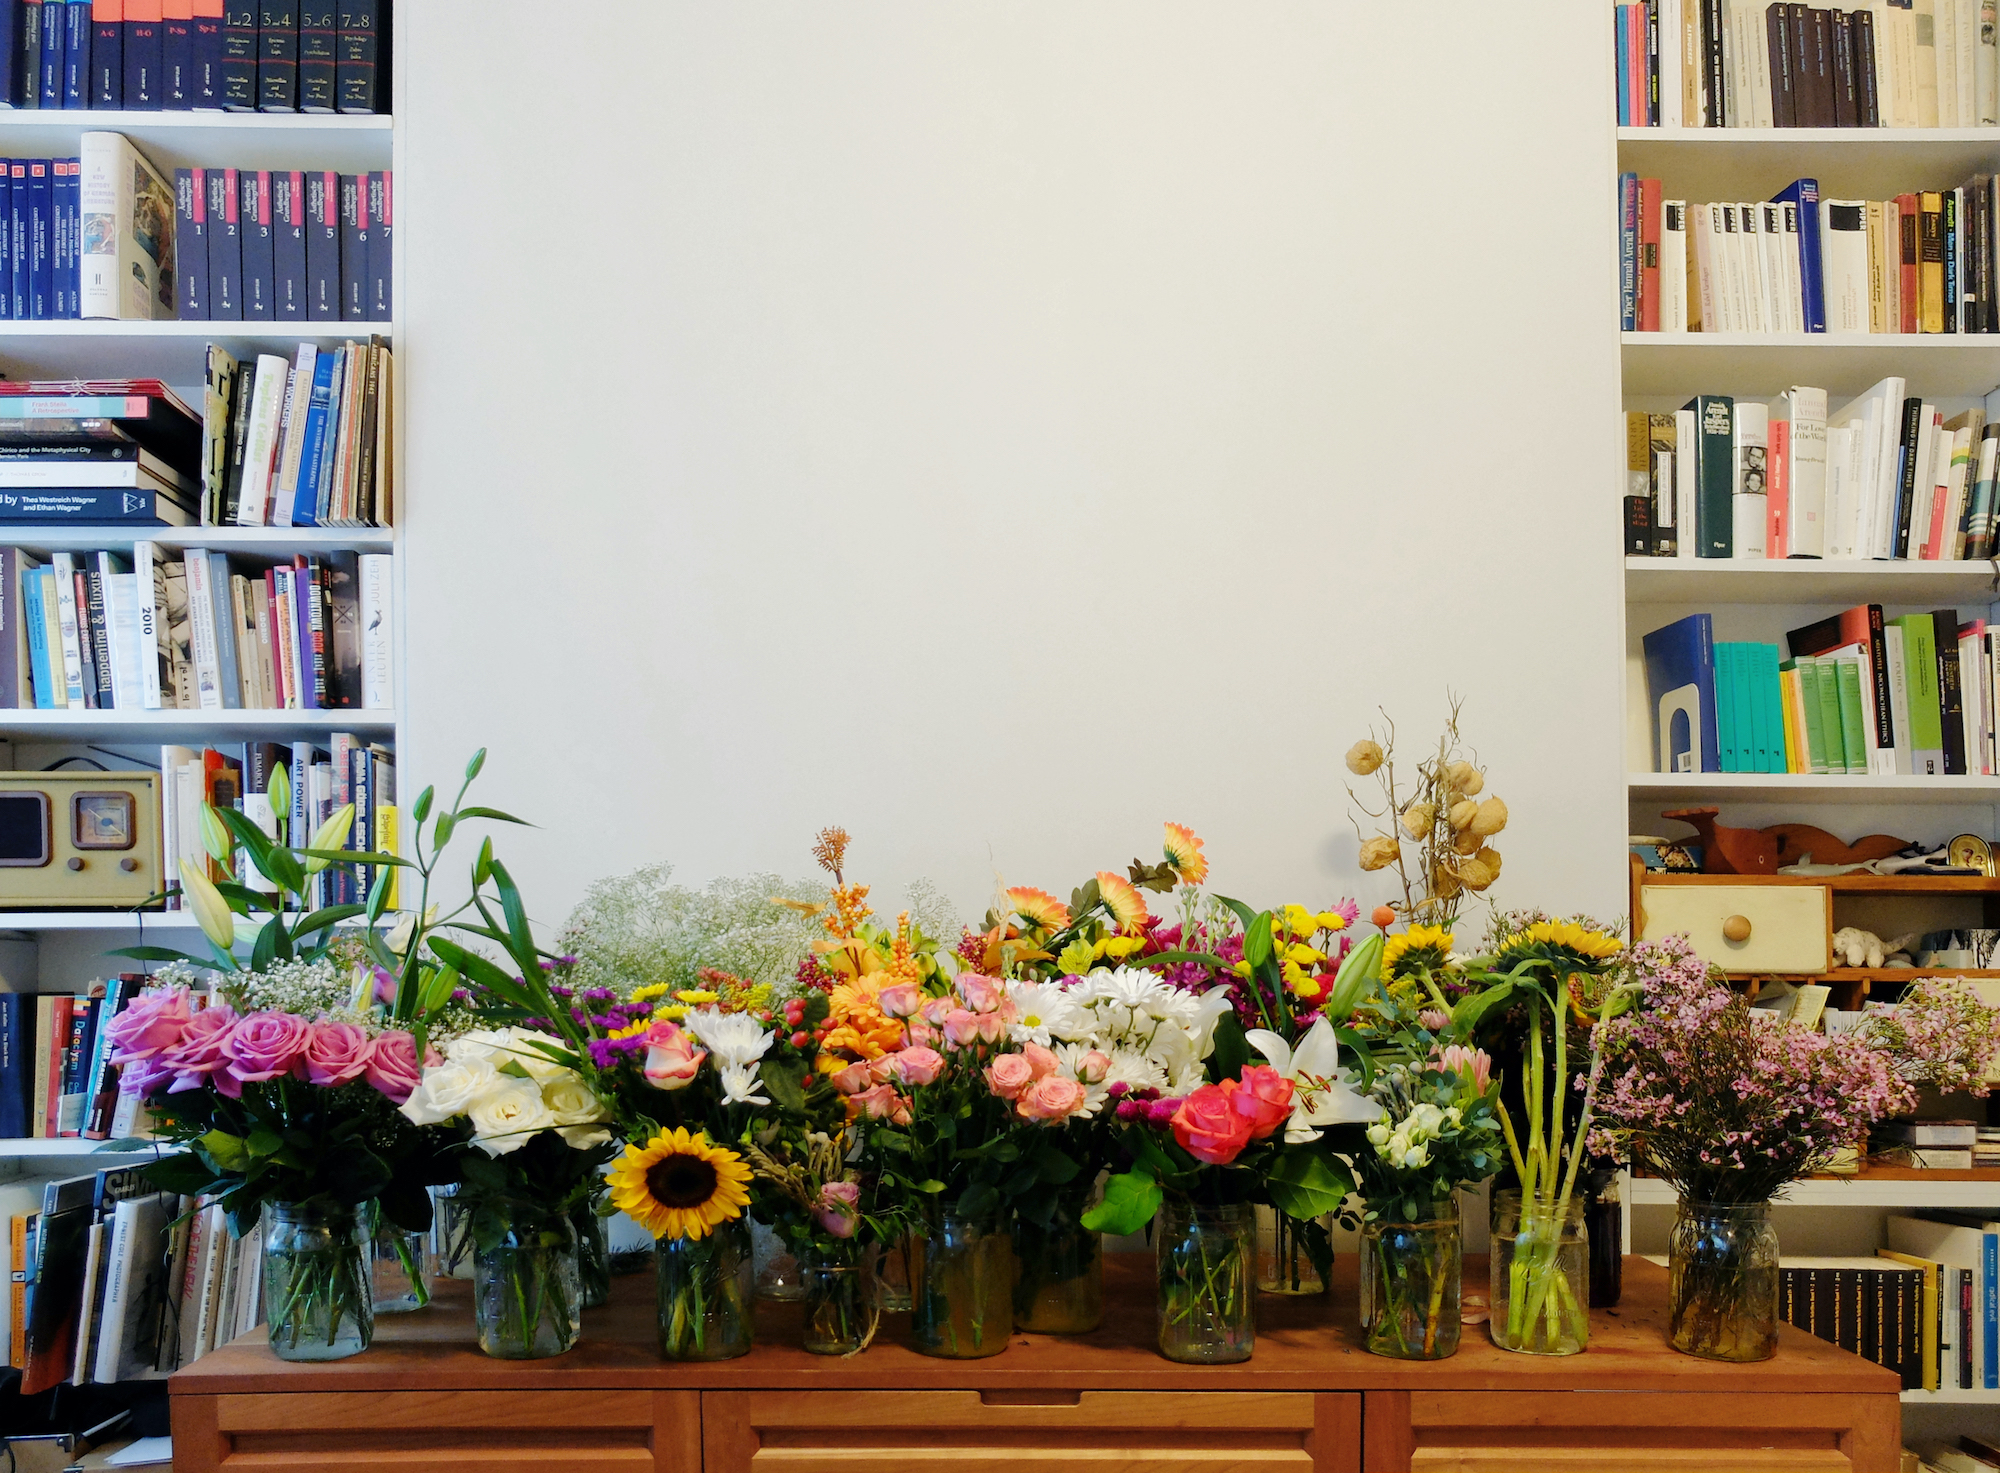 An assortment of flower bouquets in jars and vases against a tan wall.